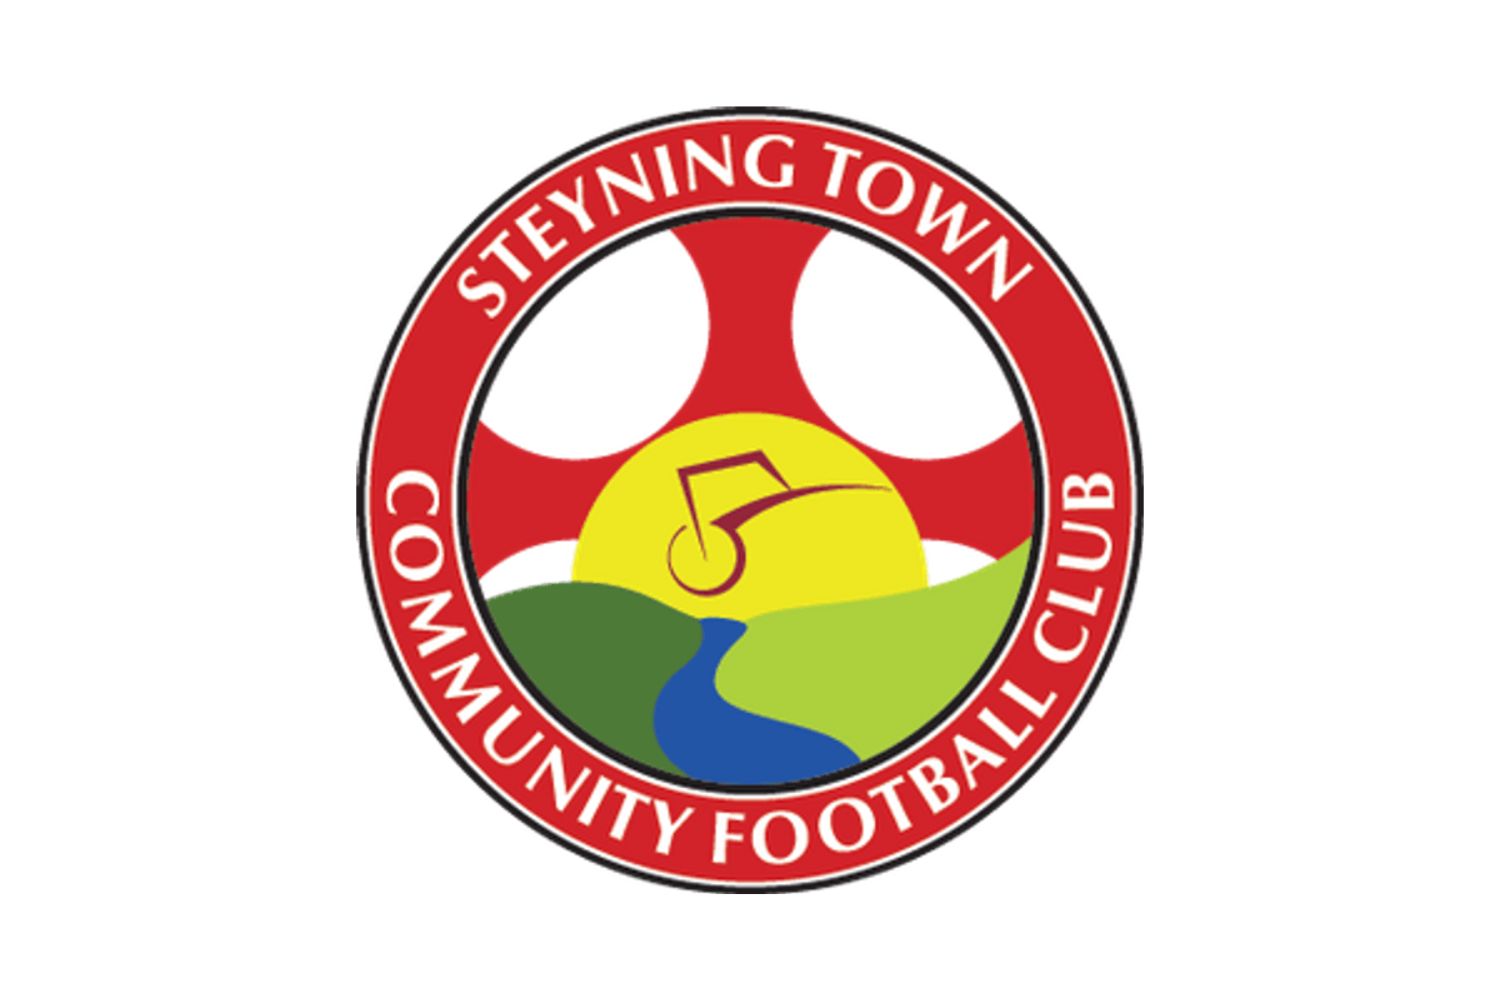 steyning-town-fc-11-football-club-facts